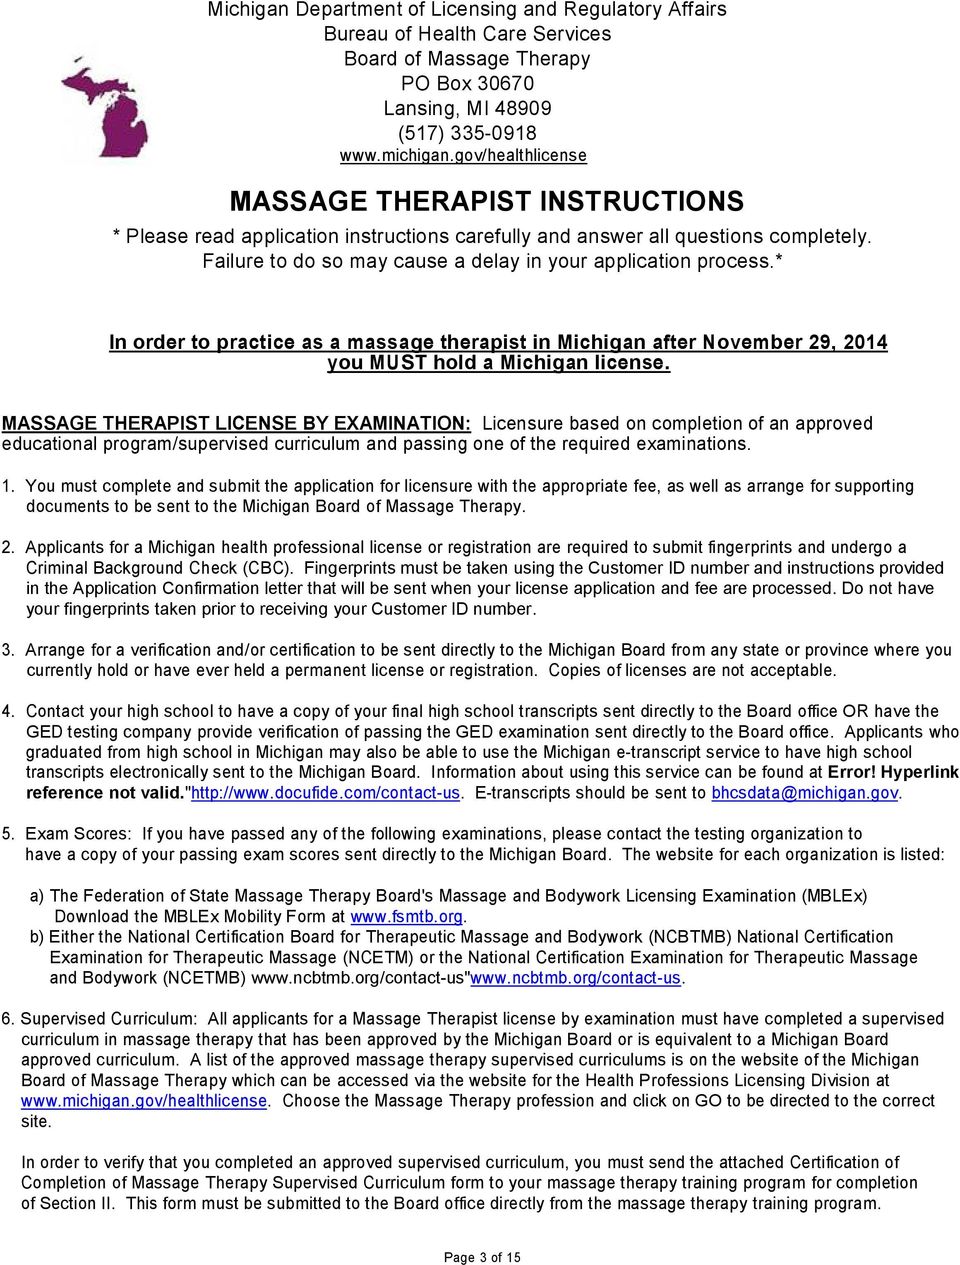 * In order to practice as a massage therapist in Michigan after vember 29, 2014 you MUST hold a Michigan license.